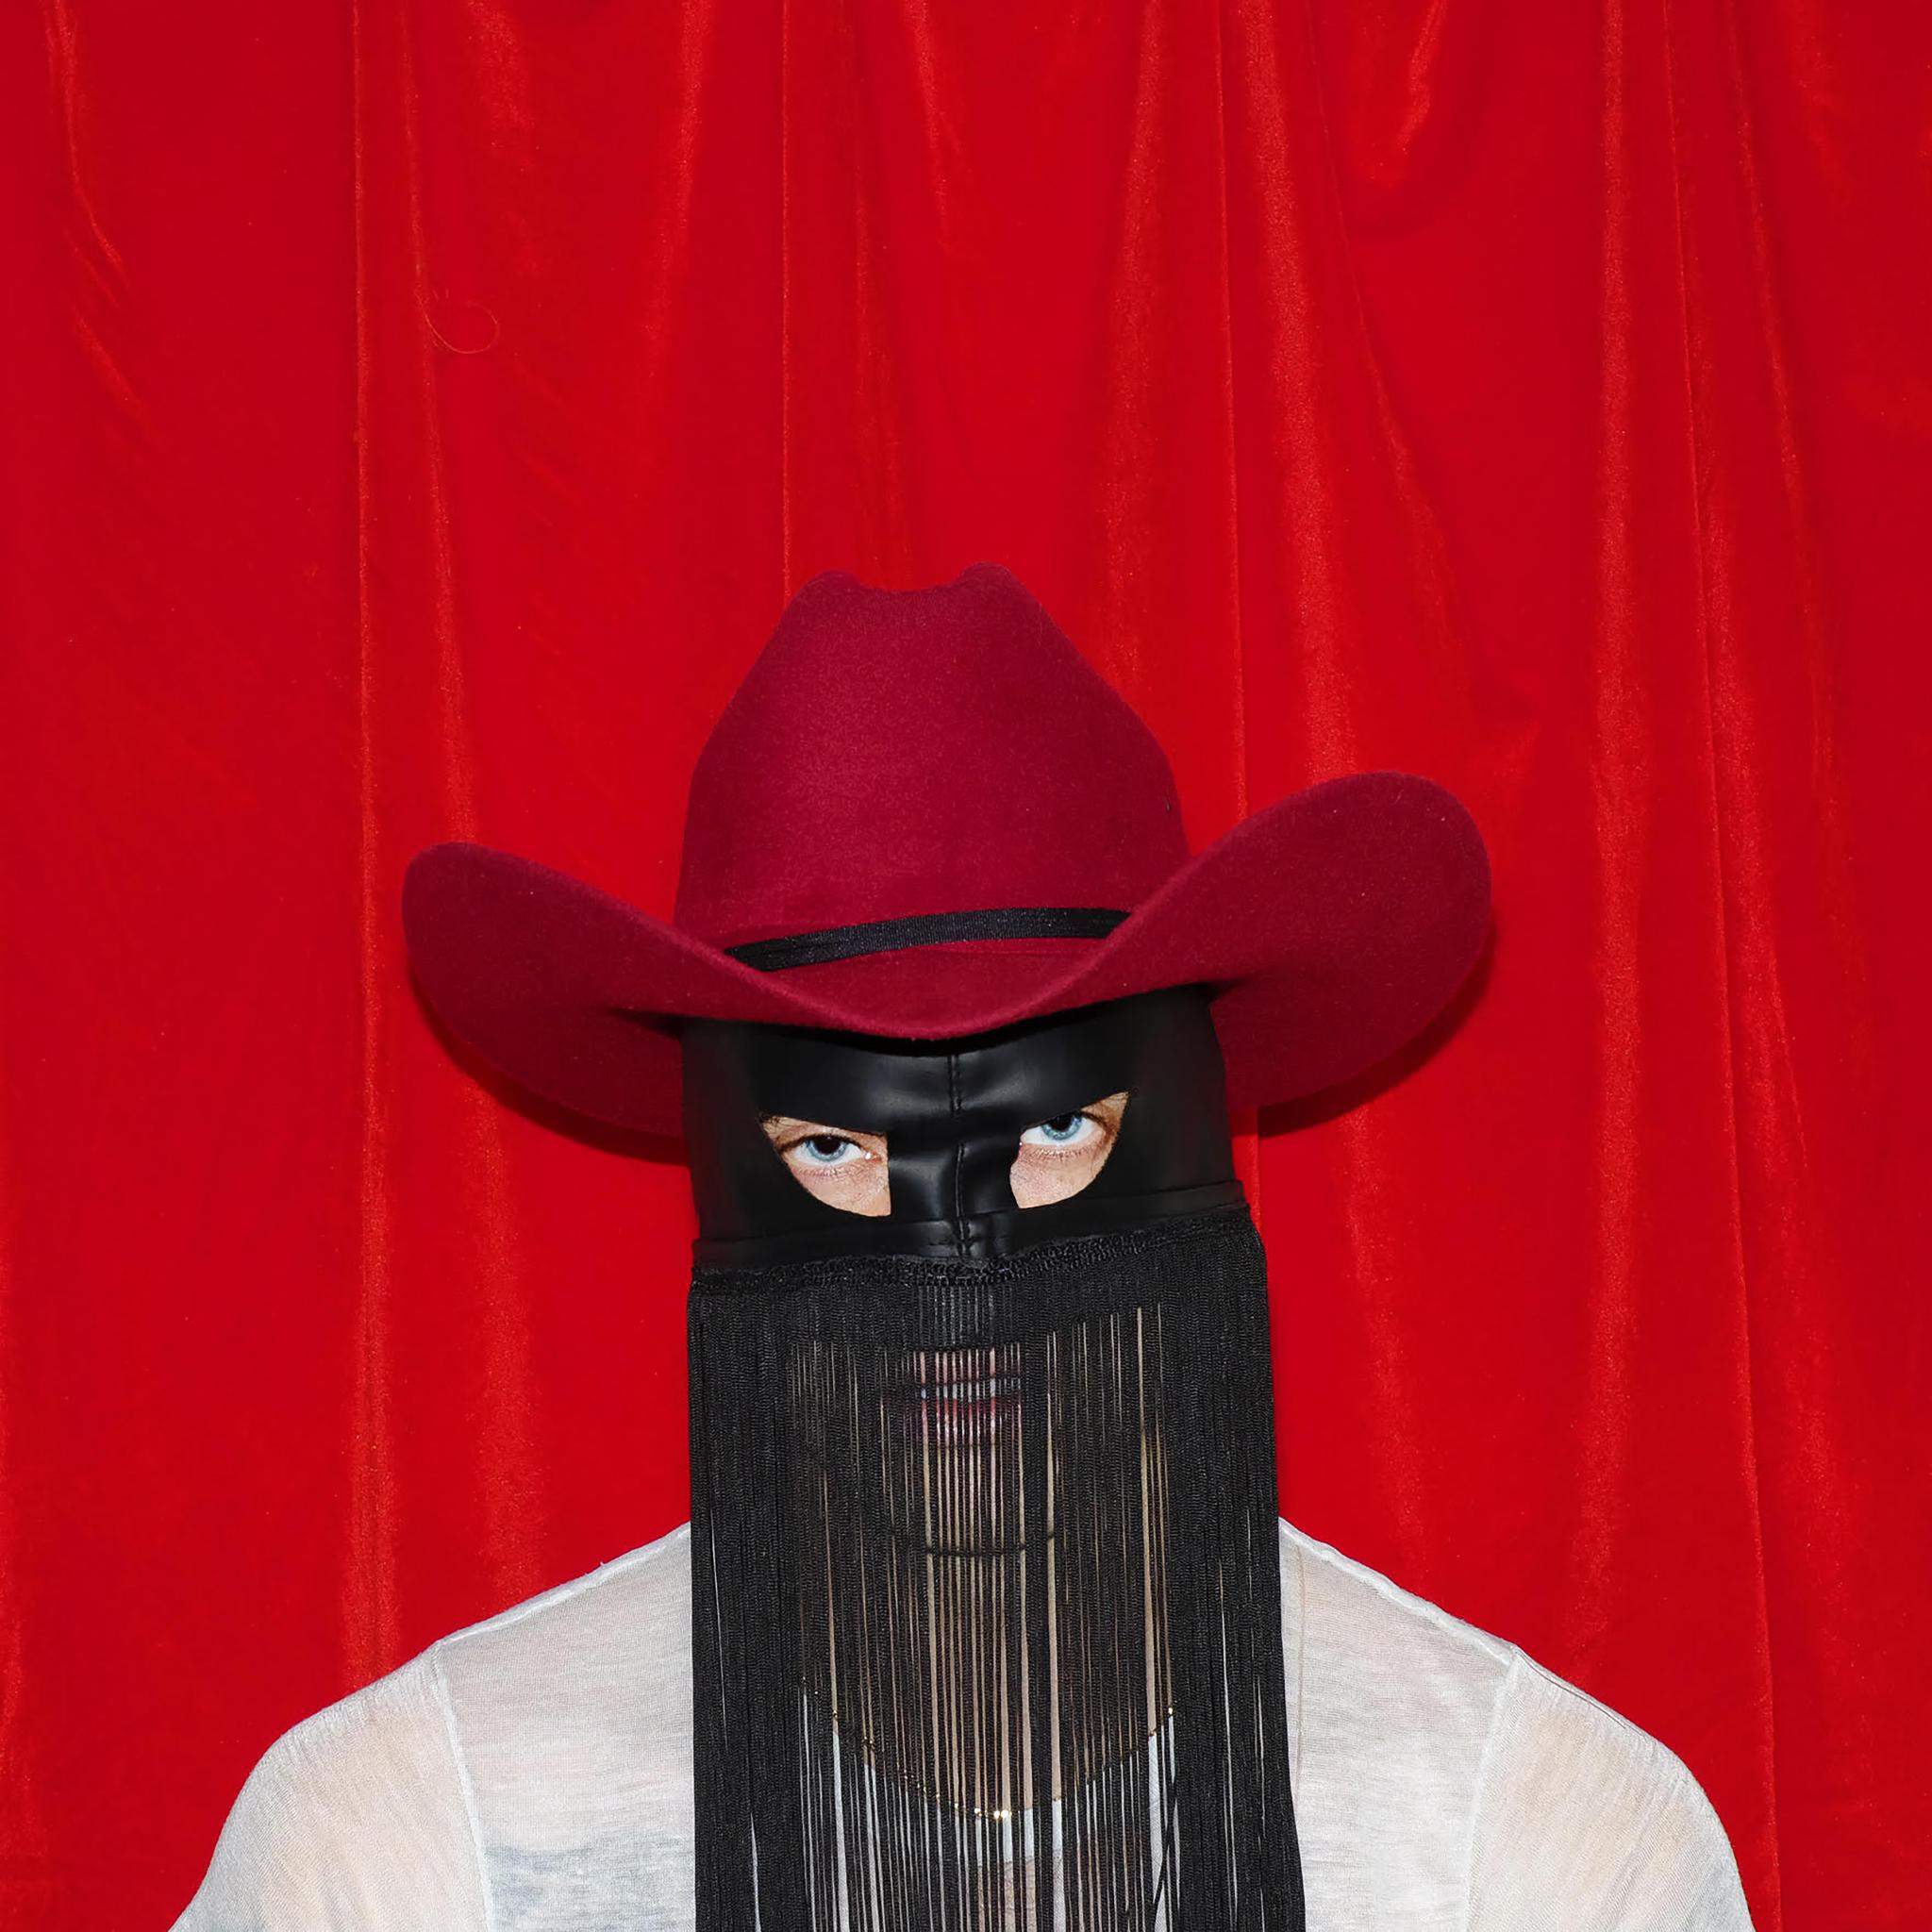 Orville Peck is the Zorro of Roots Music No Depression